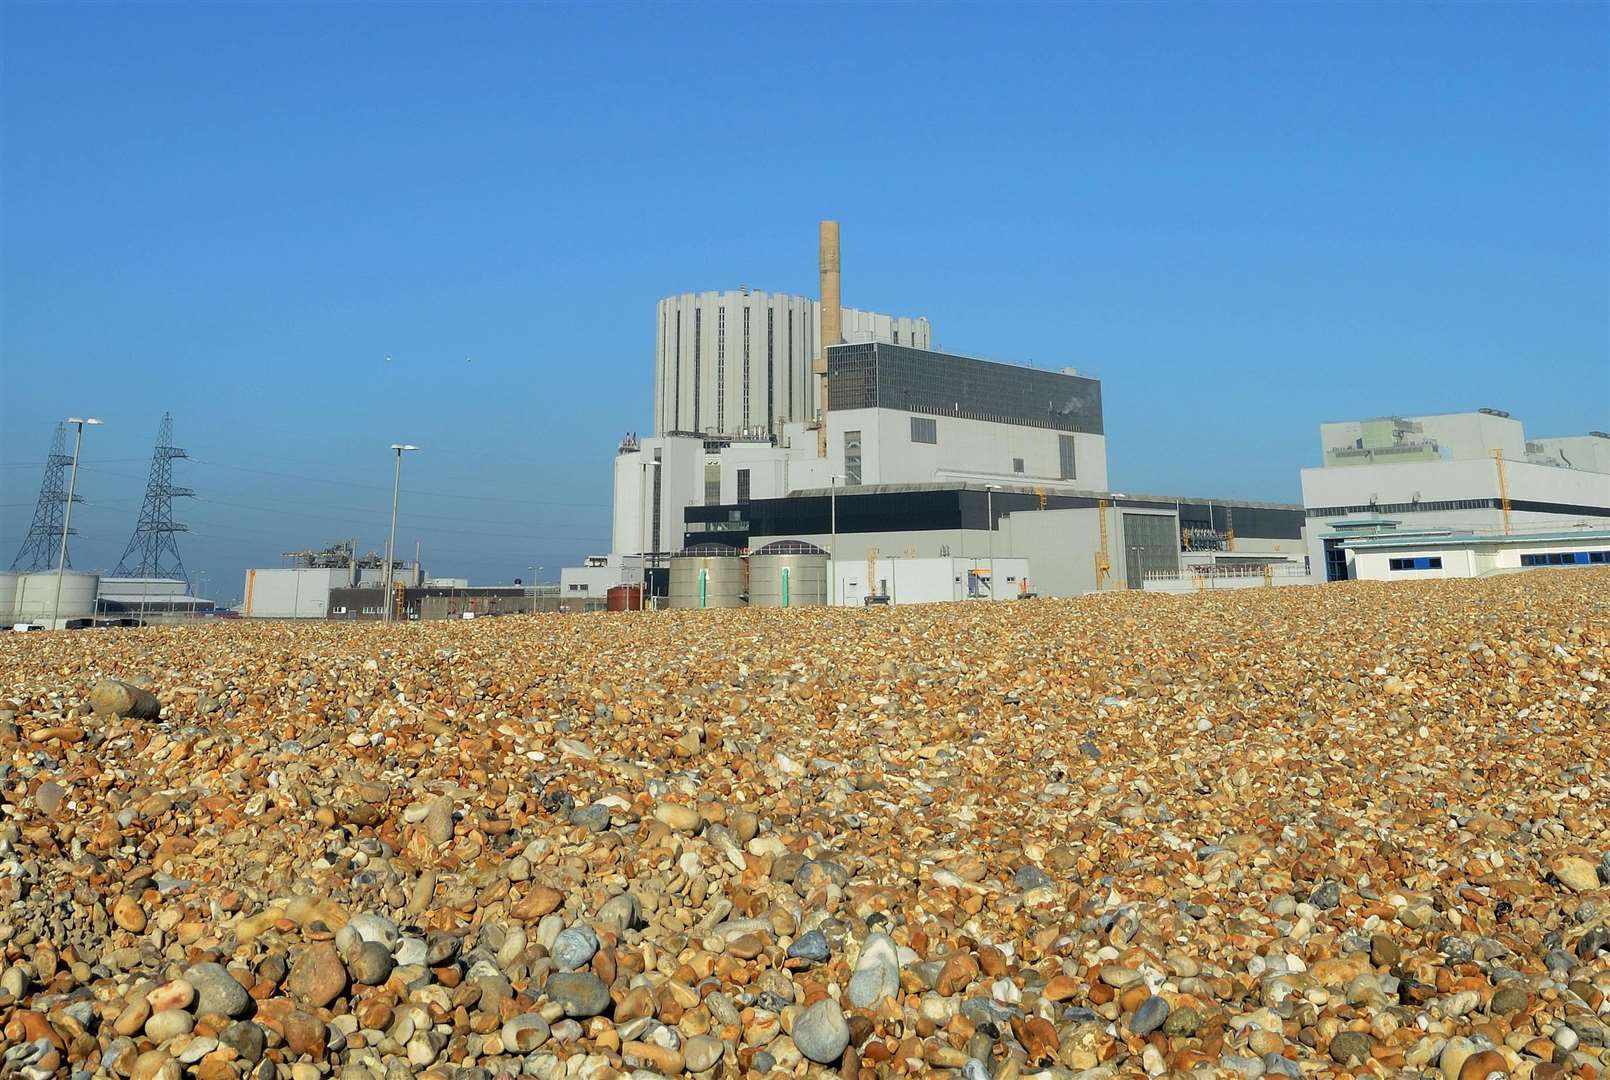 The GMB says workers at Dungeness need 'certainty and security'